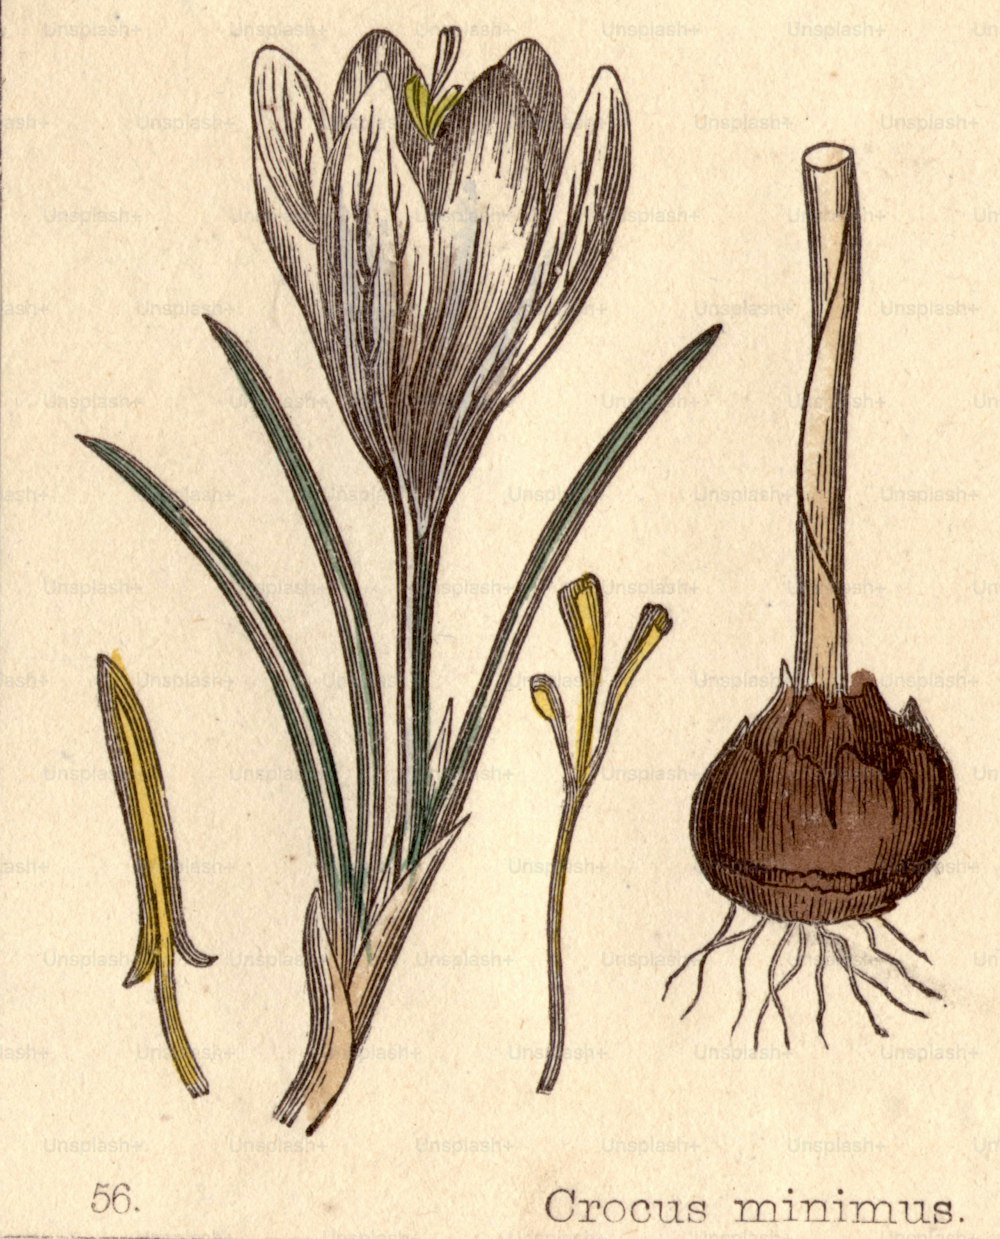 circa 1800:  Crocus minimus.  (Photo by Hulton Archive/Getty Images)